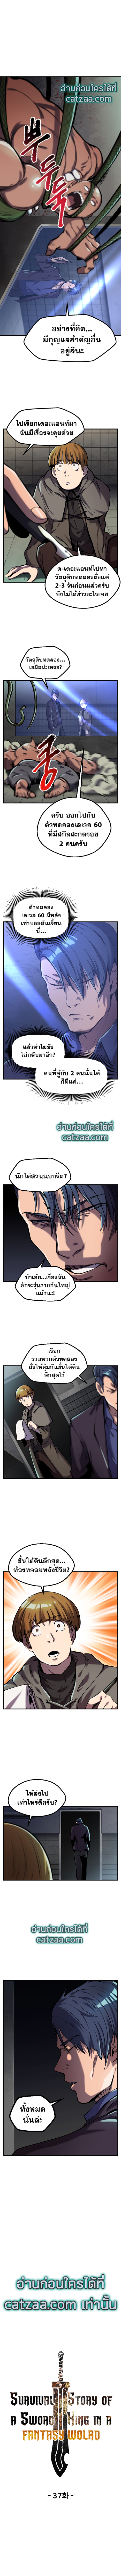 Survival of Blade King37 (2)